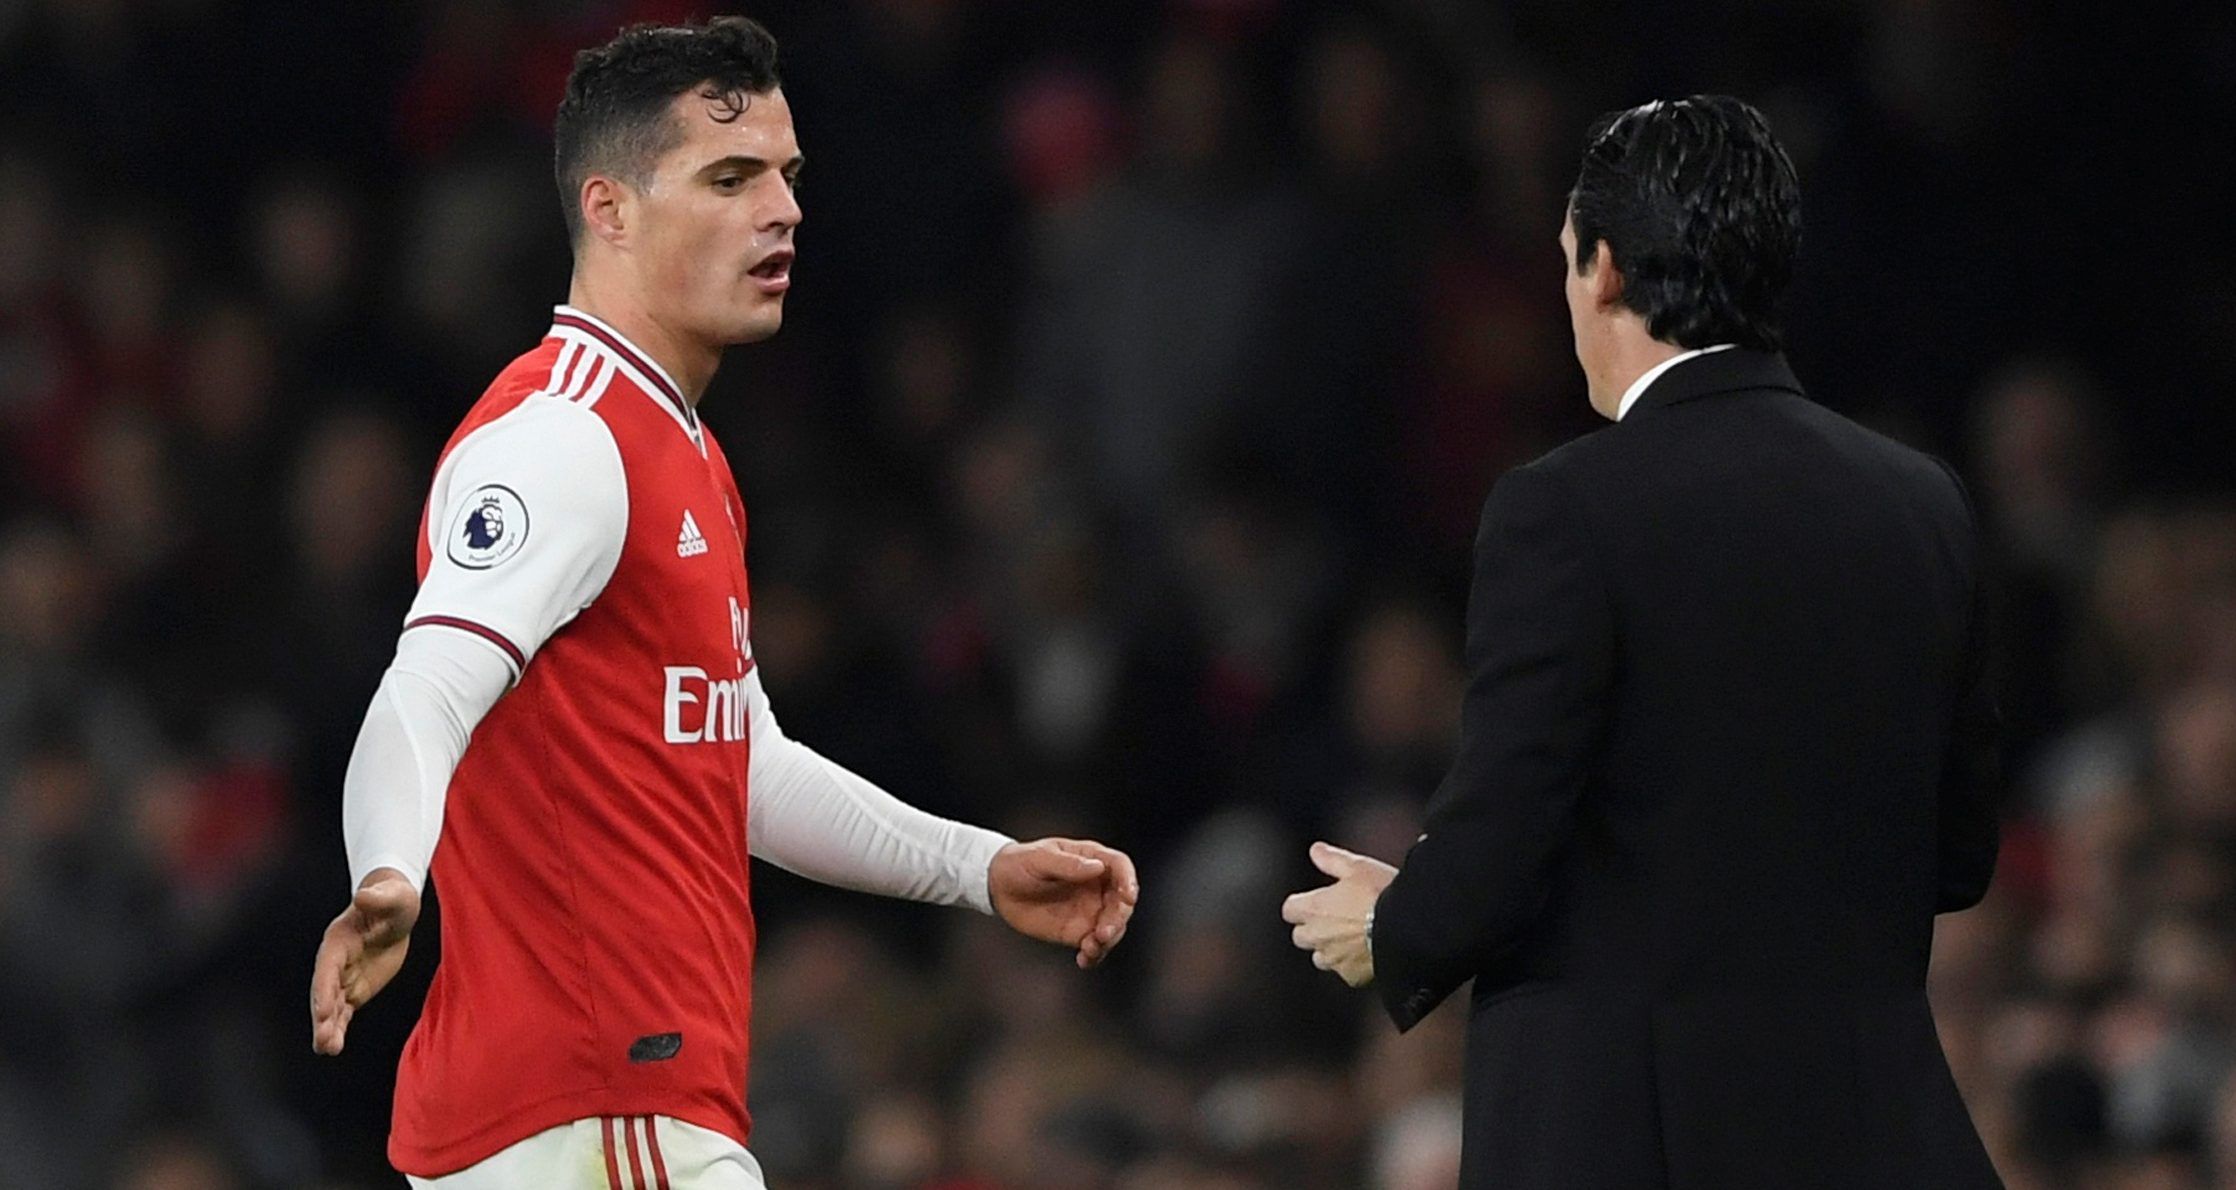 Soccer Football - Premier League - Arsenal v Crystal Palace - Emirates Stadium, London, Britain - October 27, 2019  Arsenal's Granit Xhaka reacts after being substituted   Action Images via Reuters/Tony O'Brien  EDITORIAL USE ONLY. No use with unauthorized audio, video, data, fixture lists, club/league logos or 